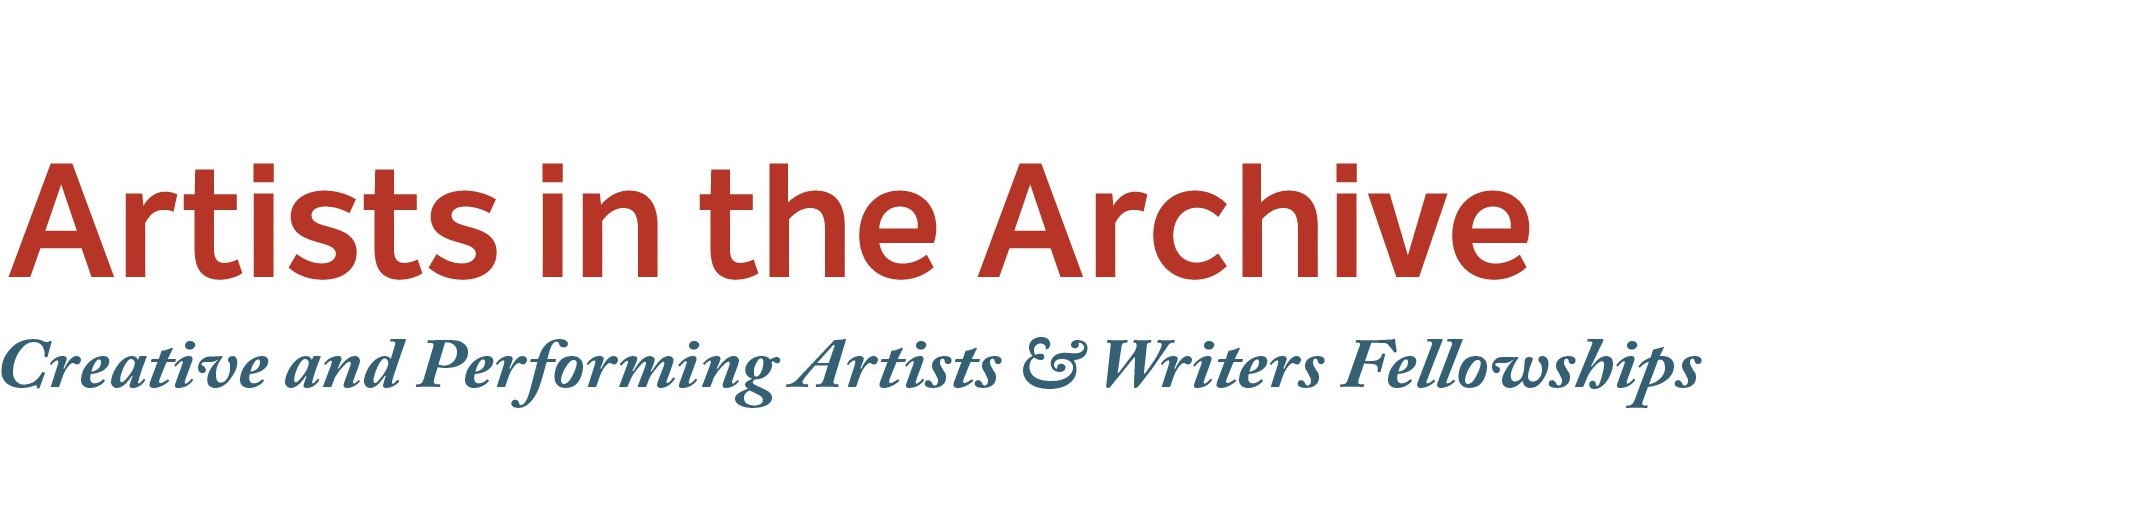 Artists in the Archive Home